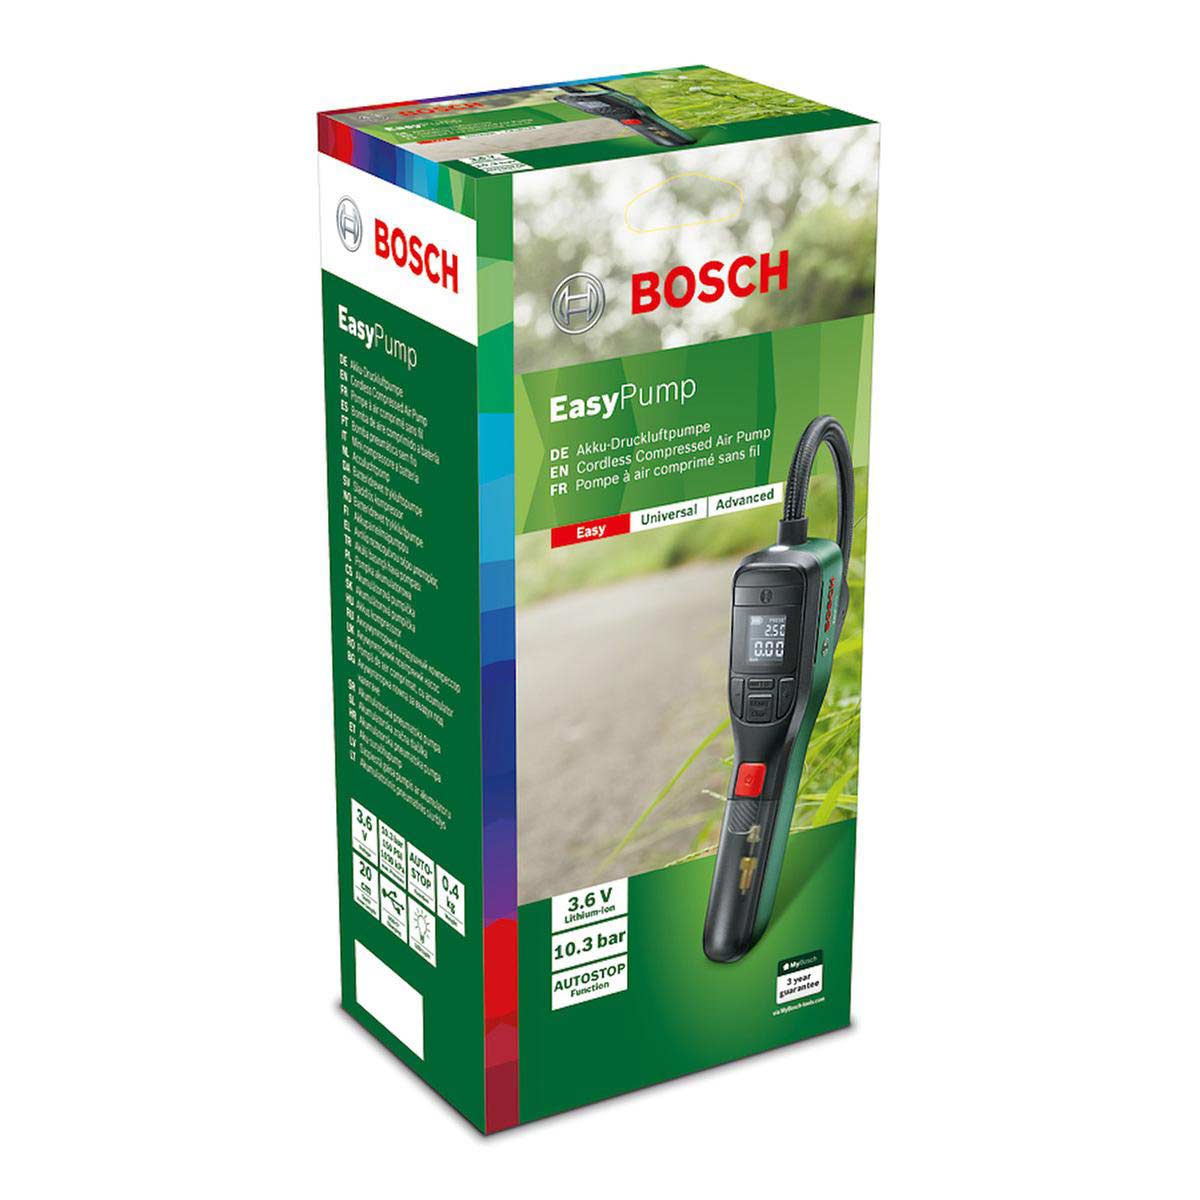 The Bosch Compressed air pump - EasyPump